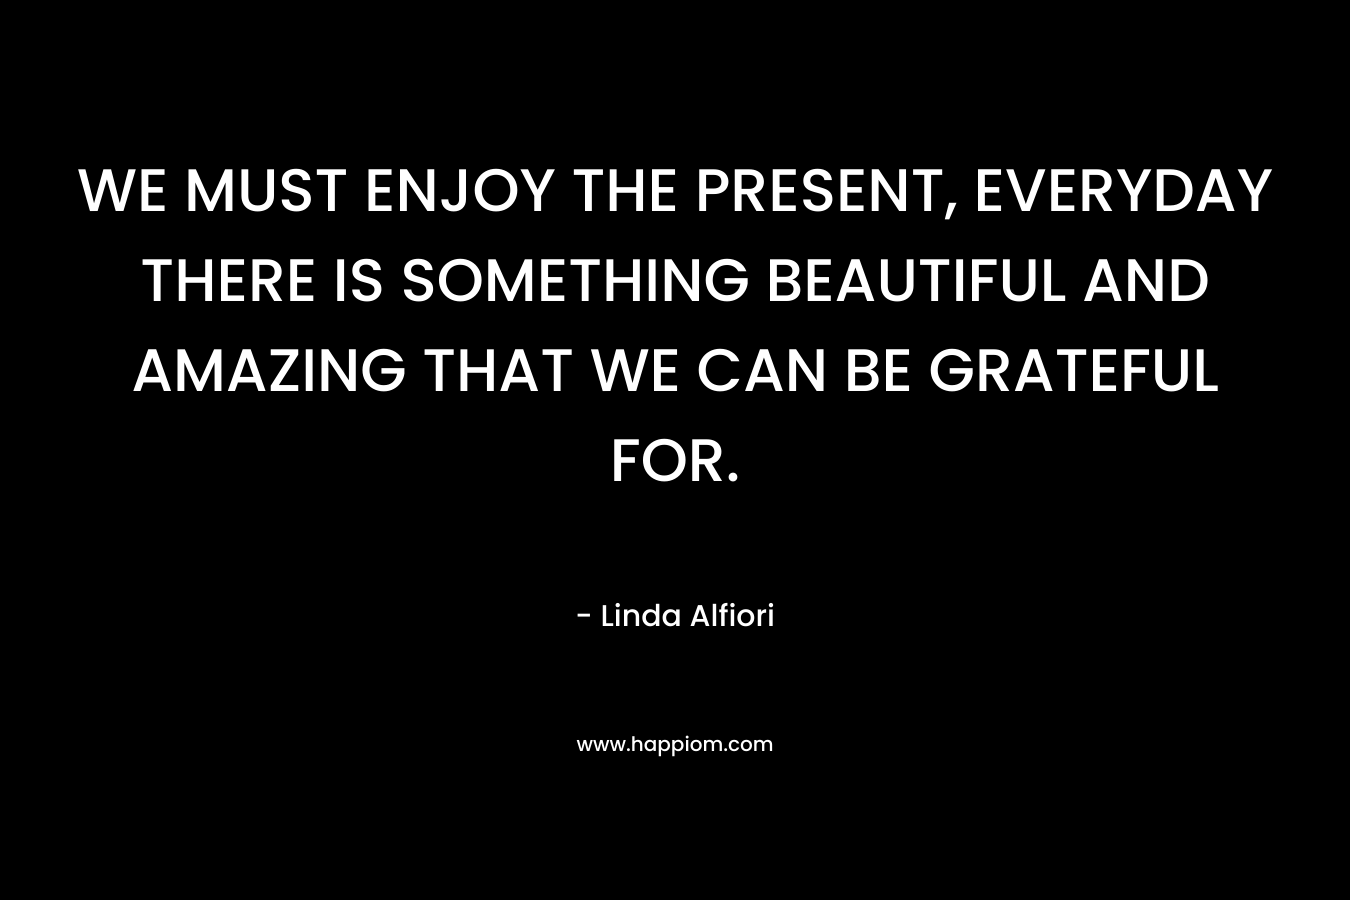 WE MUST ENJOY THE PRESENT, EVERYDAY THERE IS SOMETHING BEAUTIFUL AND AMAZING THAT WE CAN BE GRATEFUL FOR.